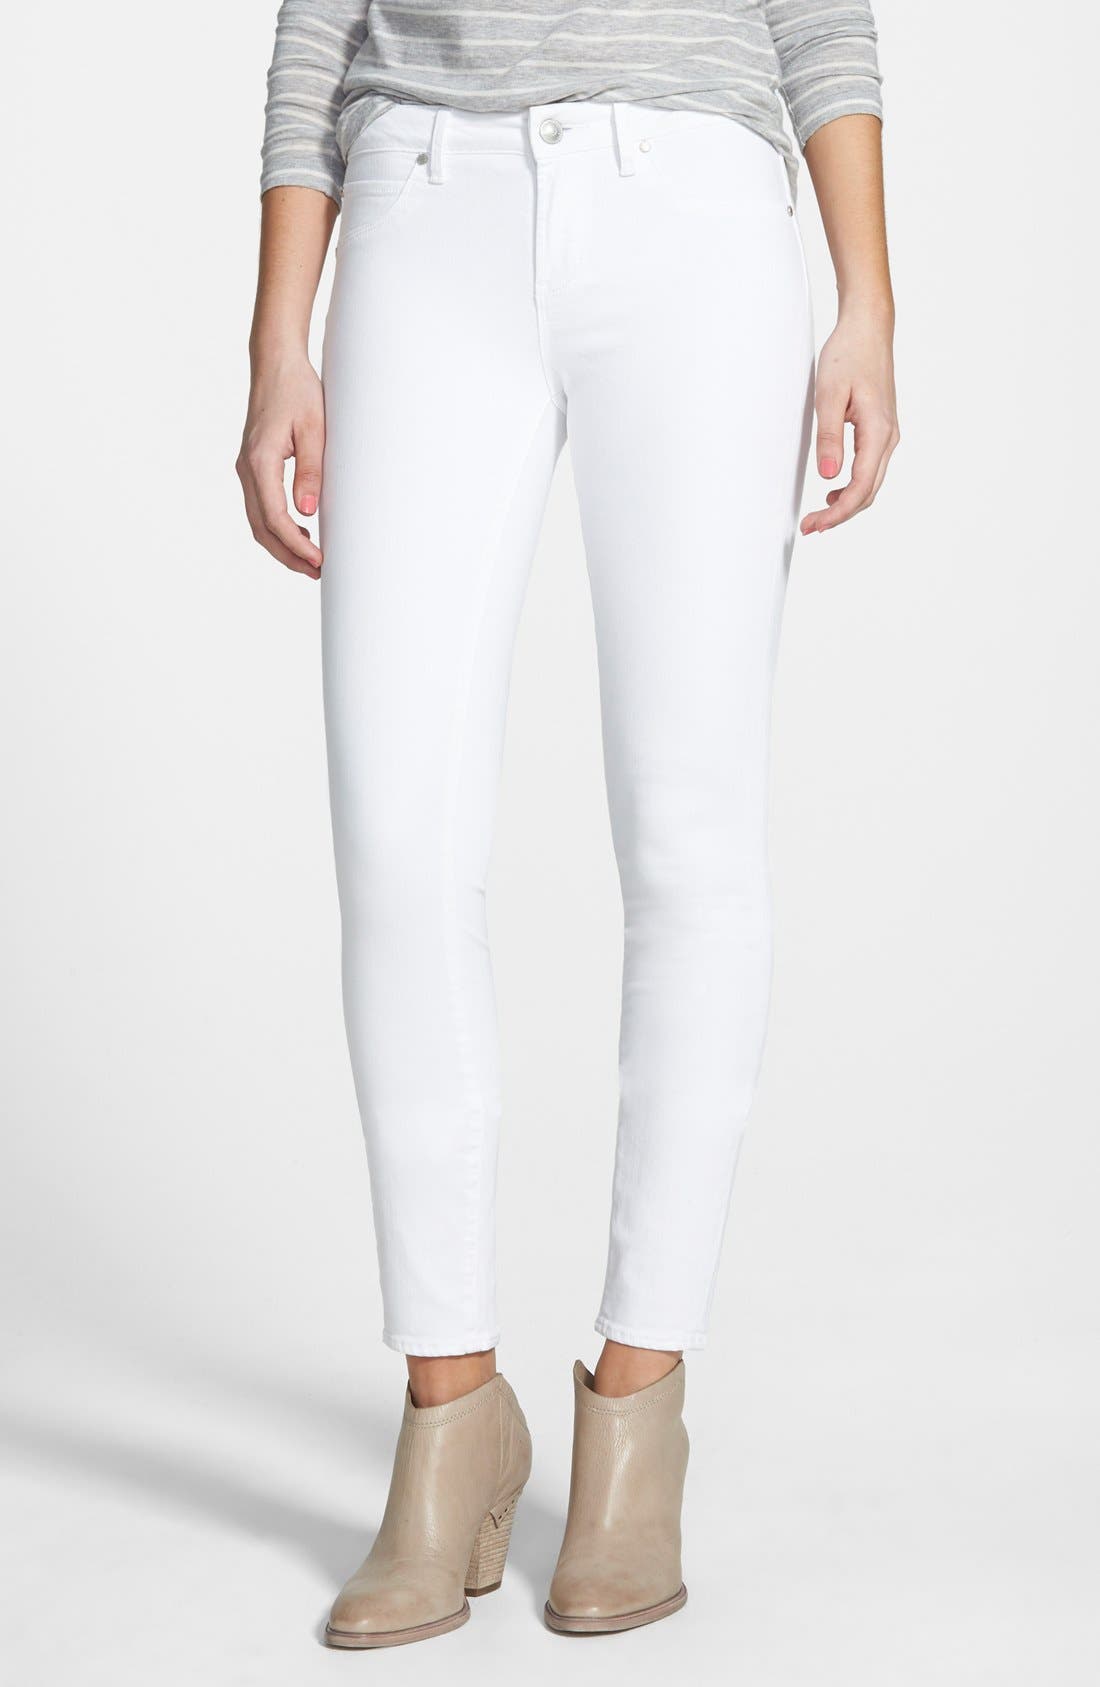 h and m stretch jeans